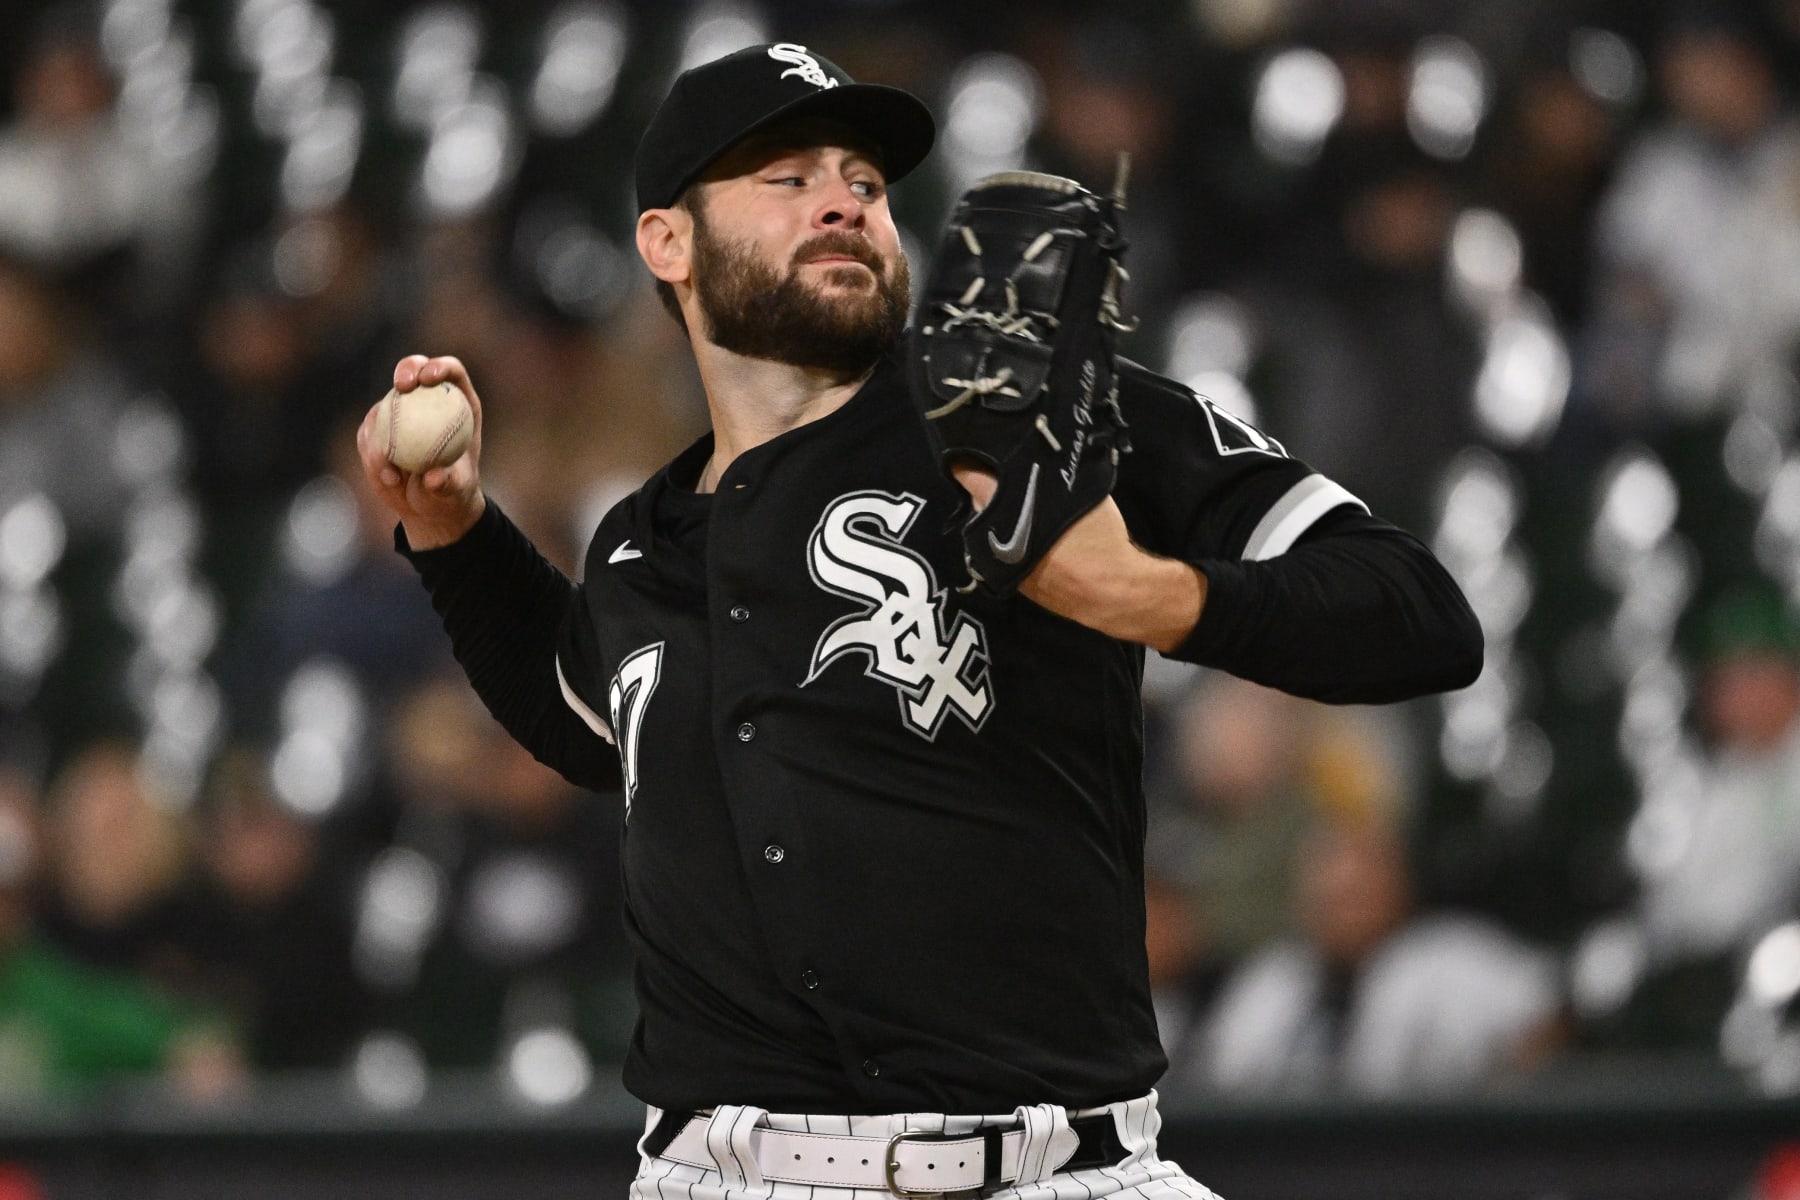 Are Giolito, Lynn in for bounce back 2023 seasons?